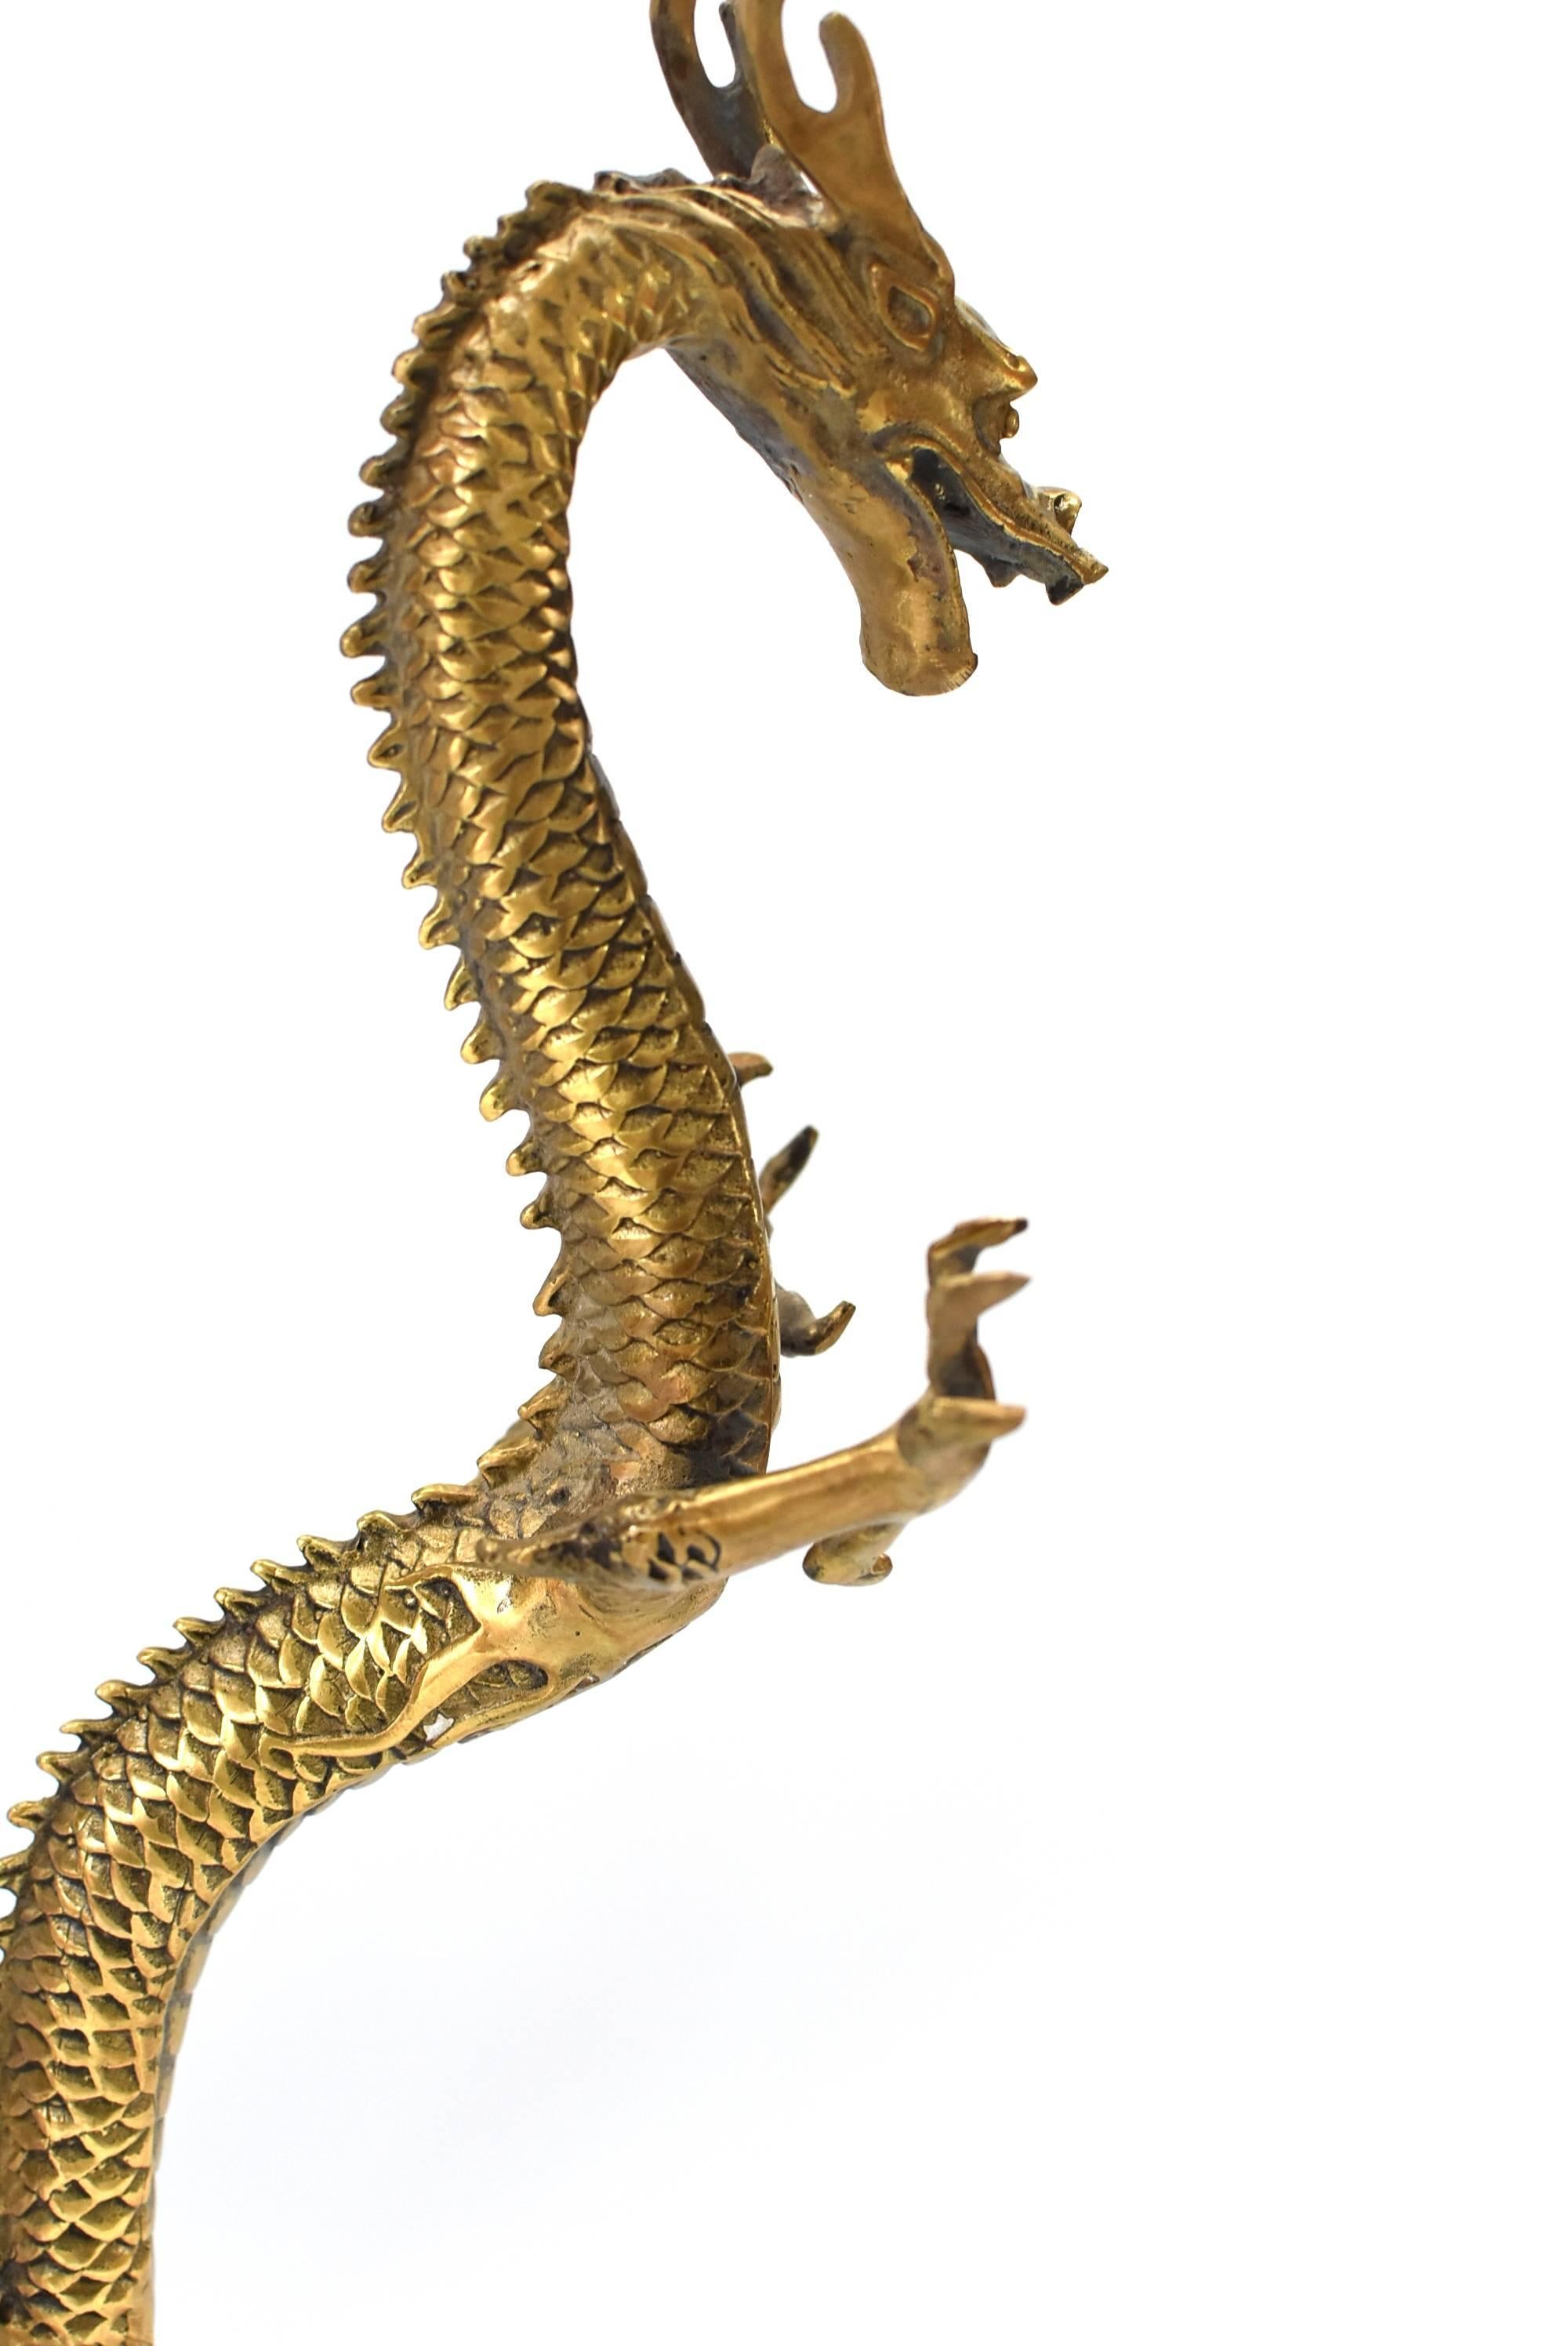 Pair of Brass Dragons, Large Standing 9